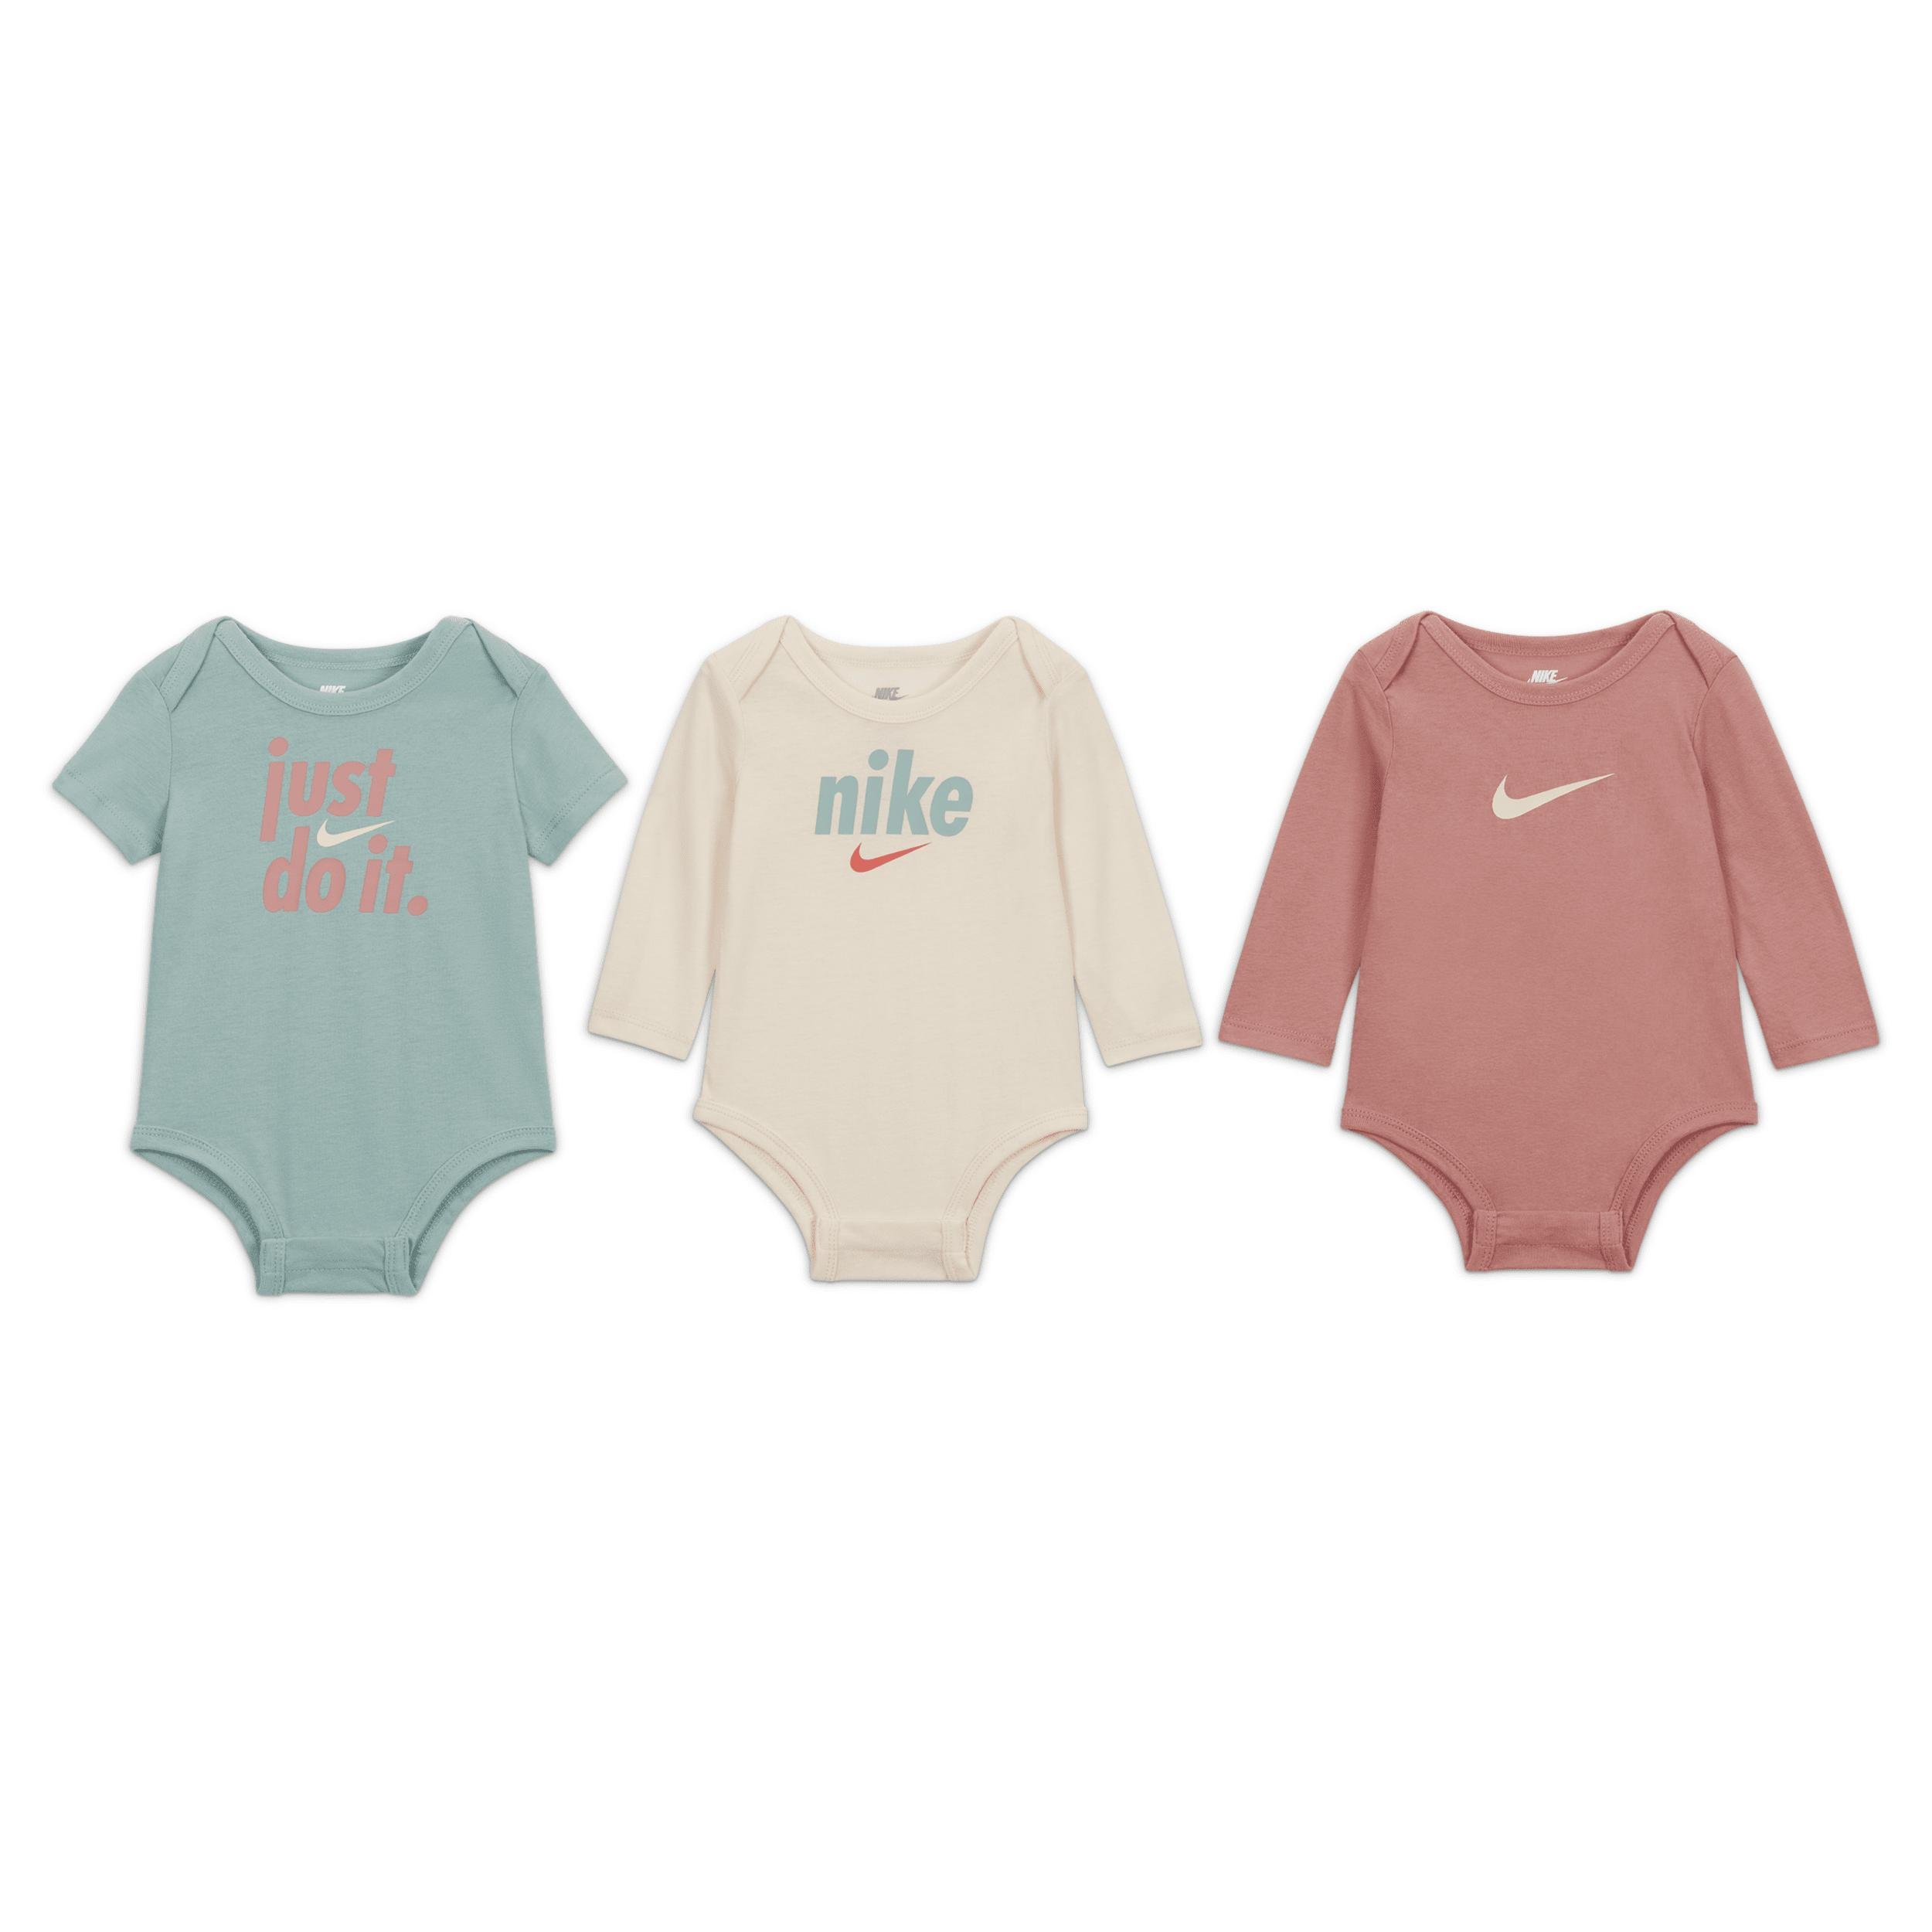 Nike E1D1 3-Pack Bodysuits Baby Bodysuit Pack by NIKE